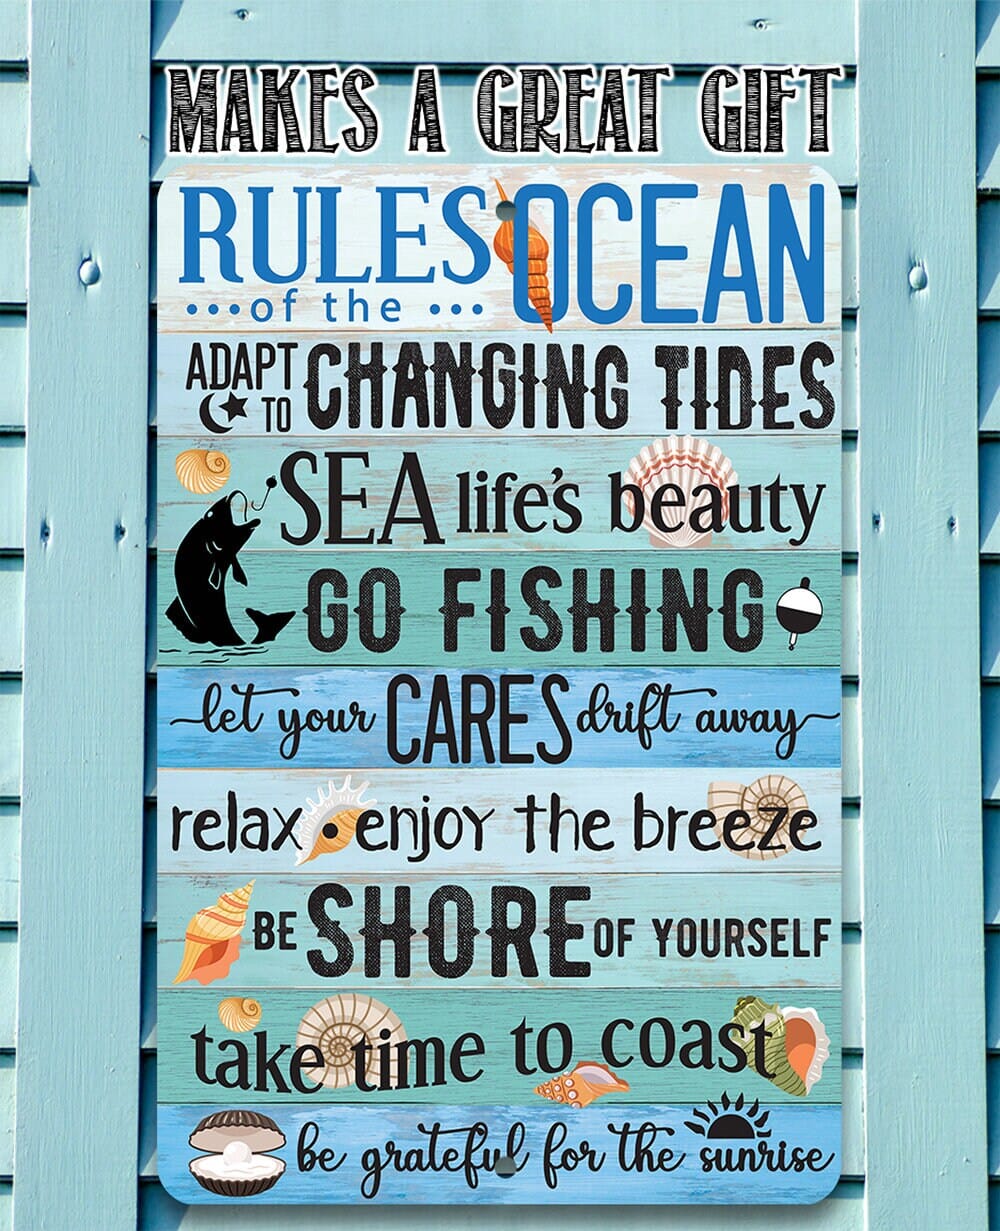 Tin - Rules of the Ocean - Durable Metal Sign - 8" x 12" or 12" x 18" Aluminum Tin Awesome Metal Poster Lone Star Art 